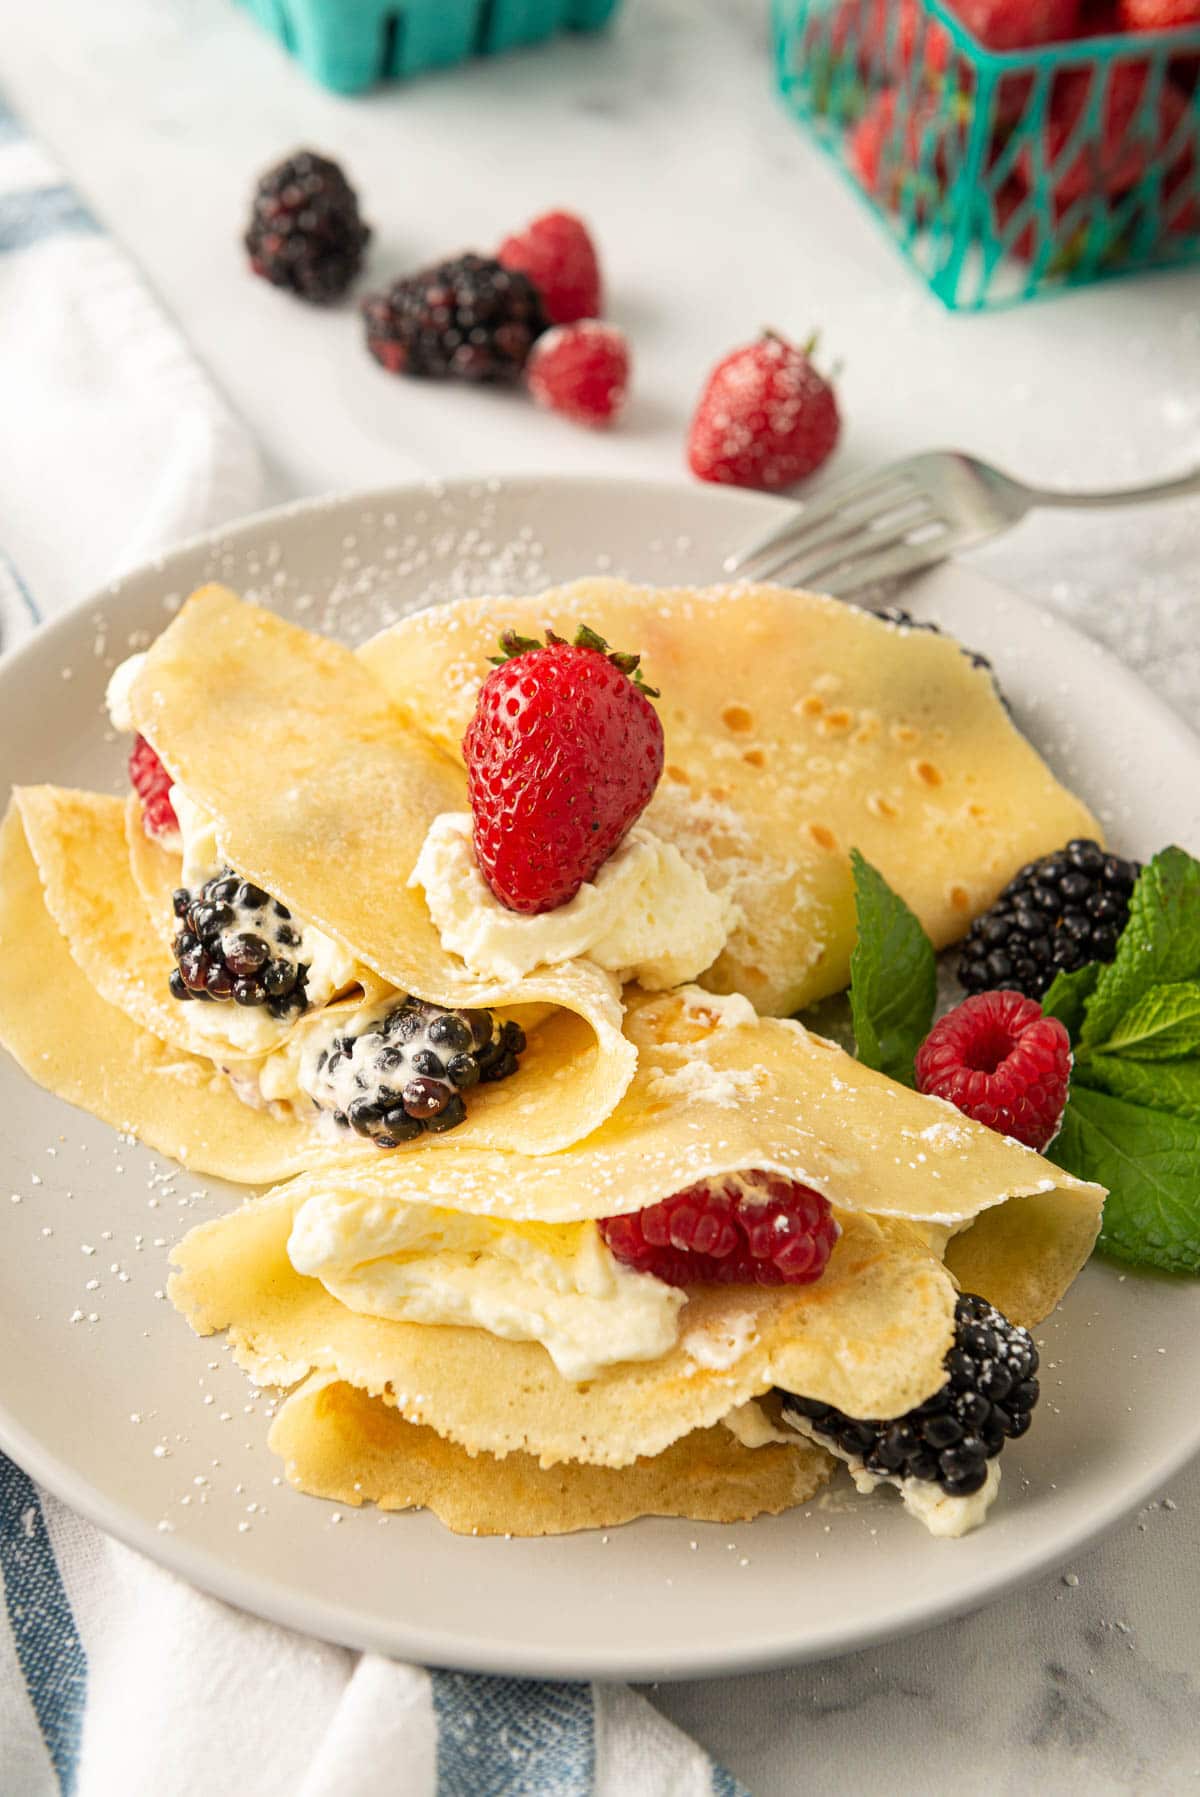 An example of French crepes folded with whipped cream and a mix of uncut berries.